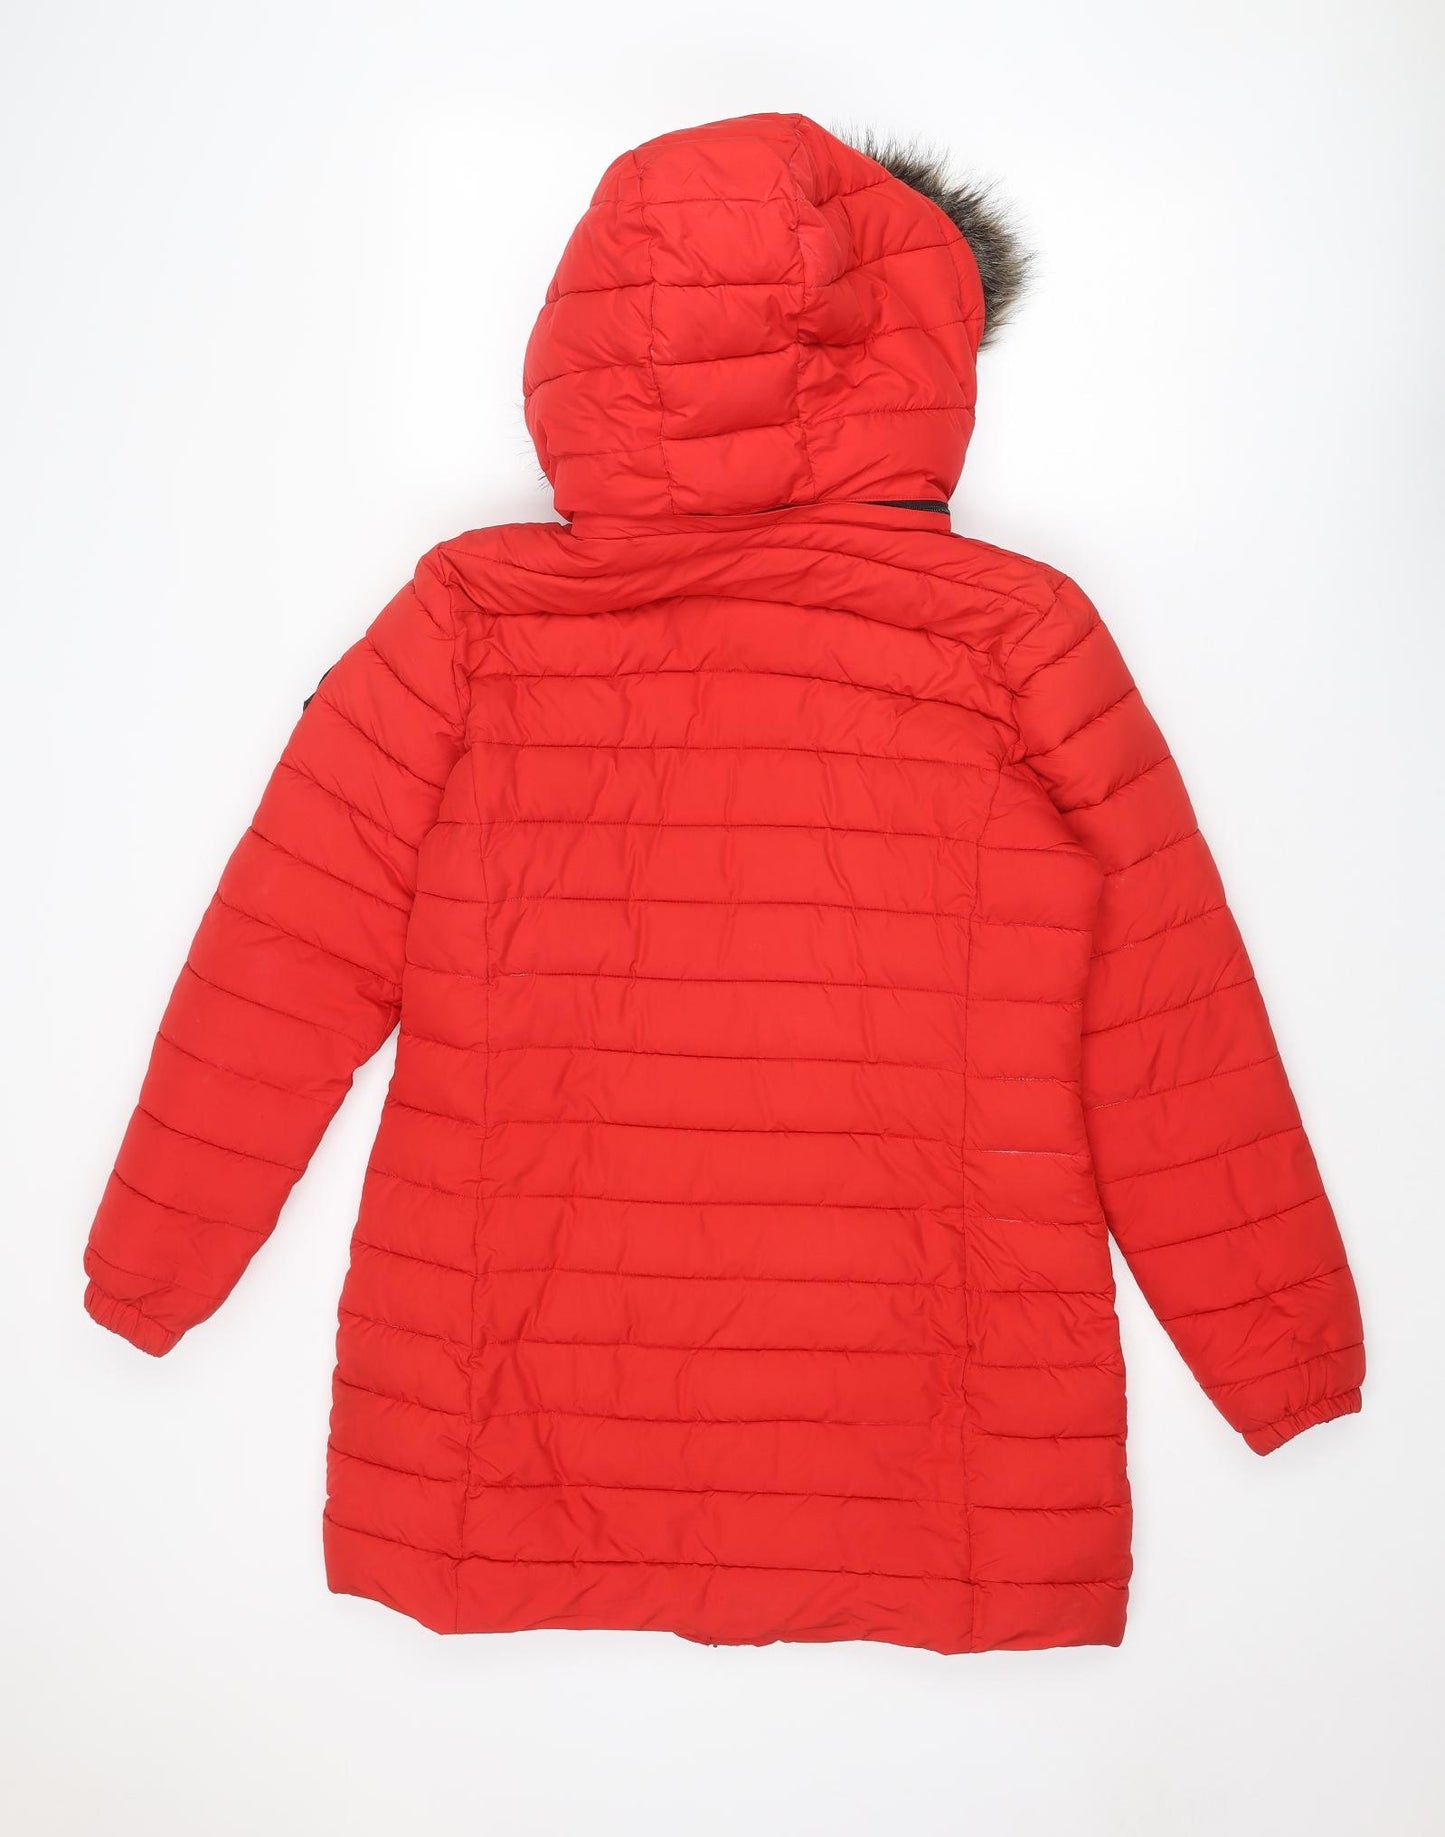 Superdry Womens Red Quilted Coat Size 12 Zip